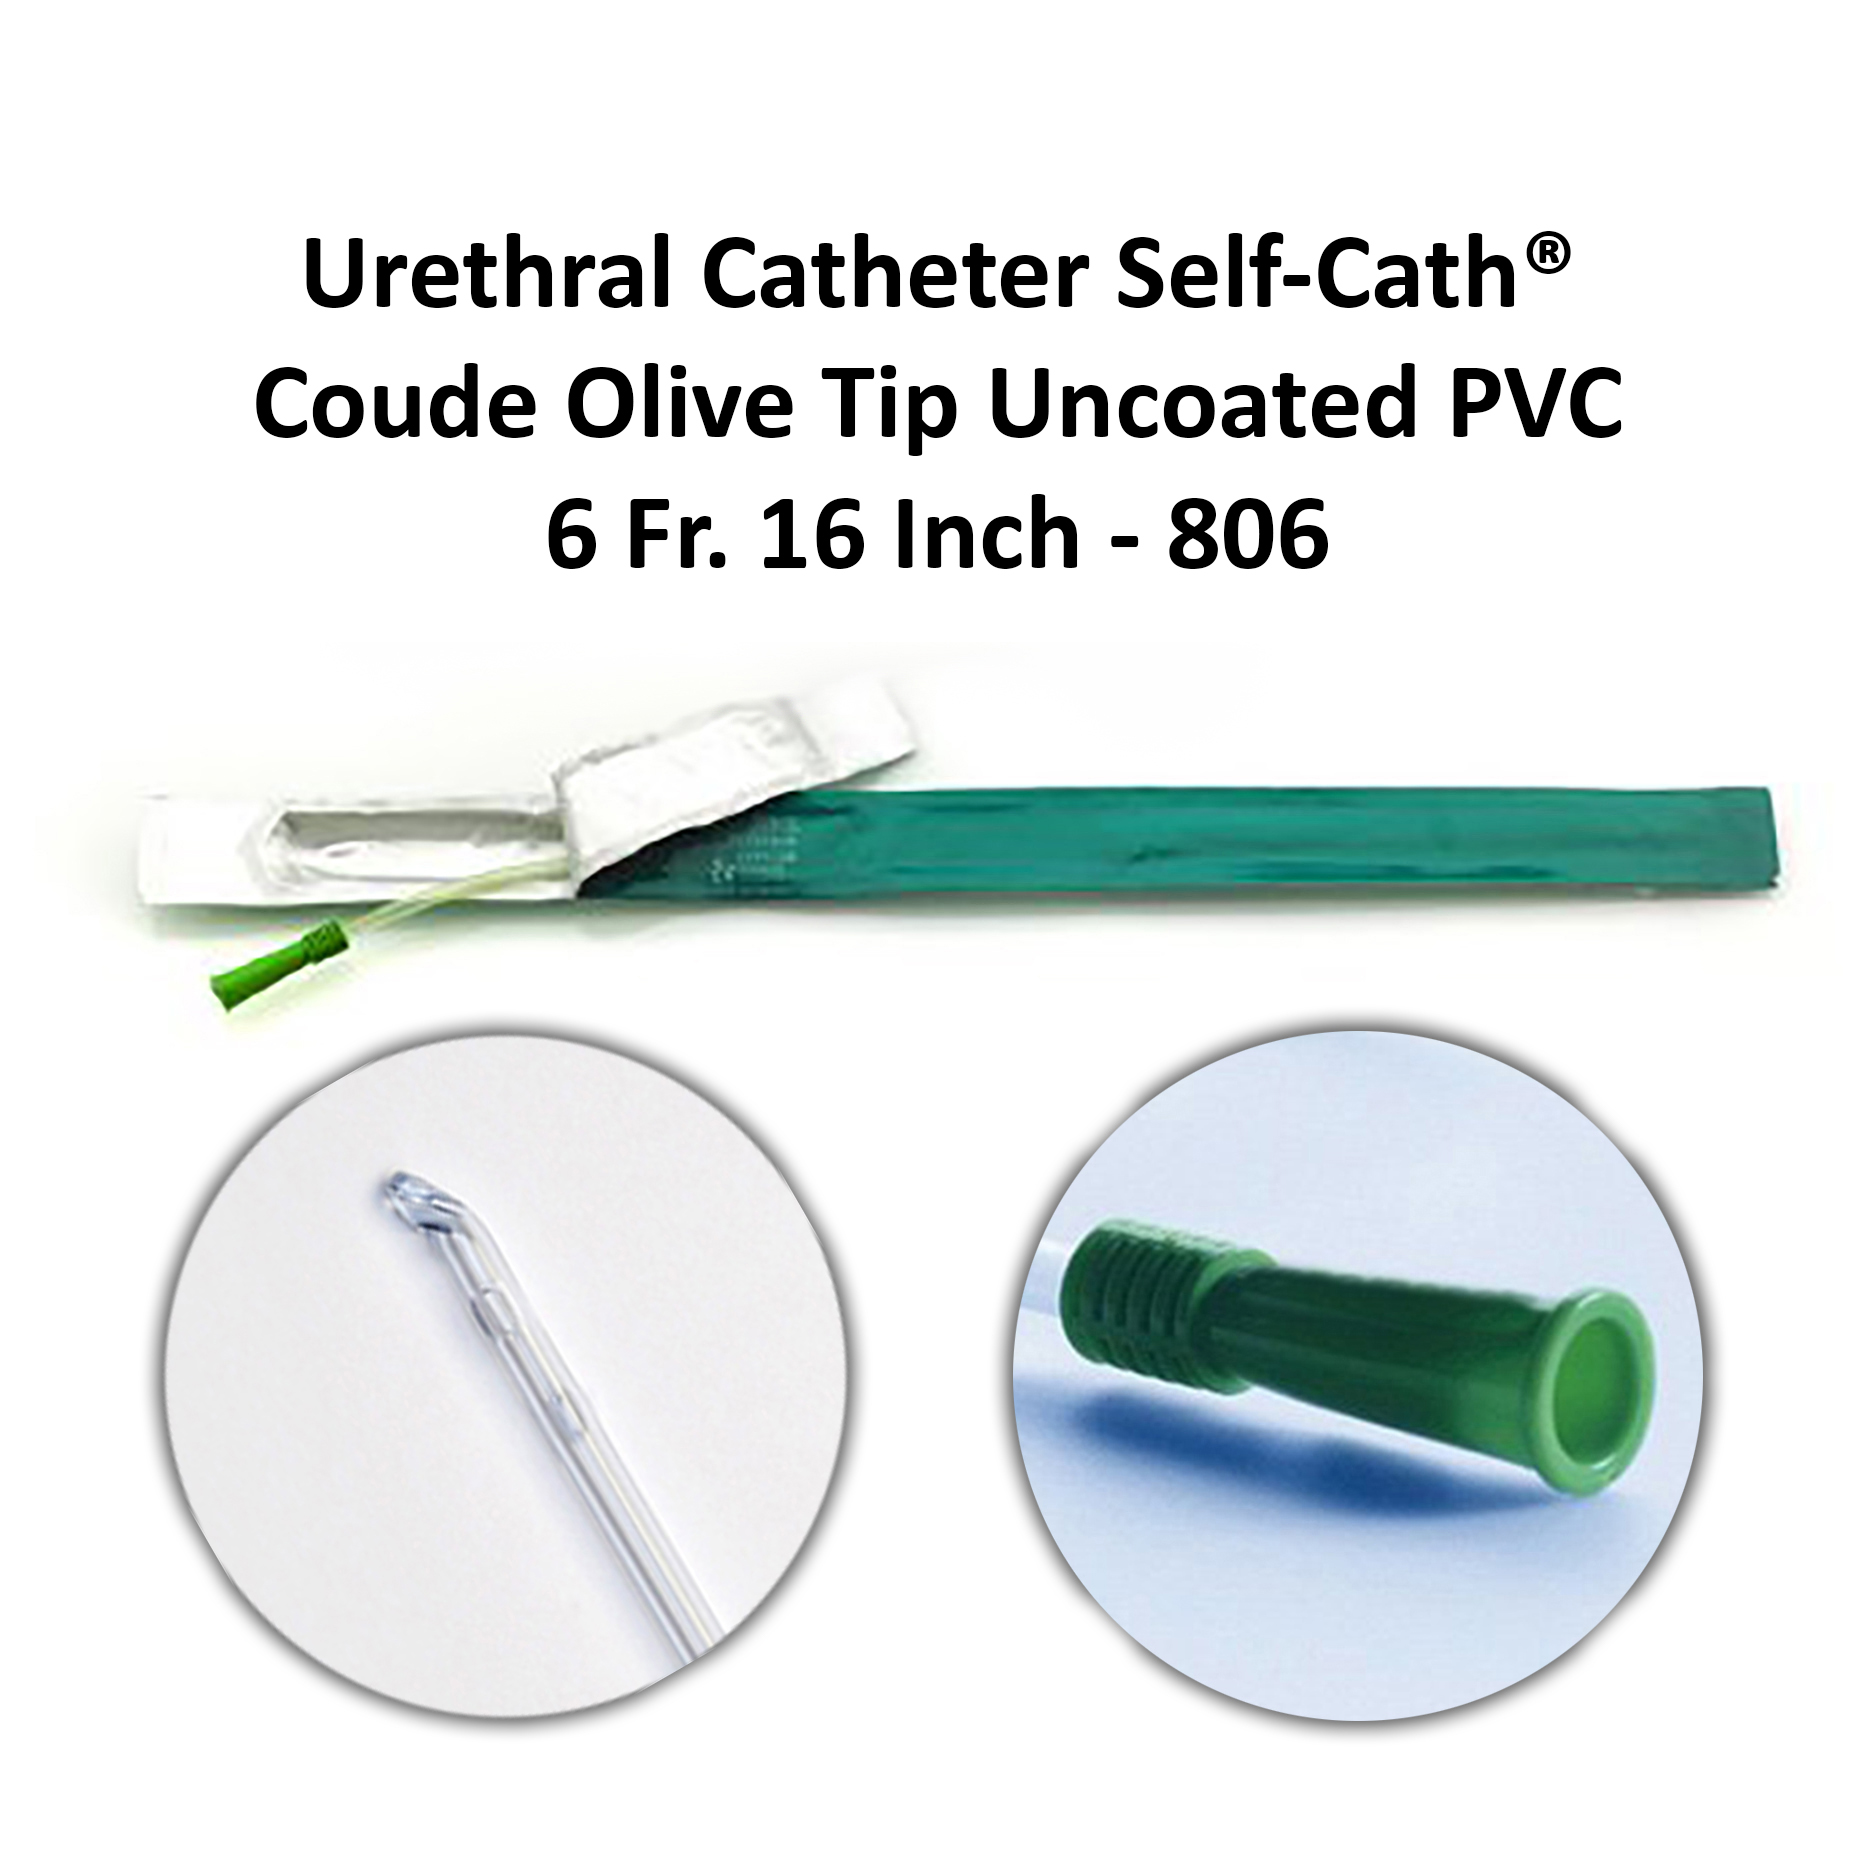 Urethral Catheter Self-Cath® Coude Olive Tip Uncoated PVC 6 Fr - 16 Inch - 806 Available in Michigan USA